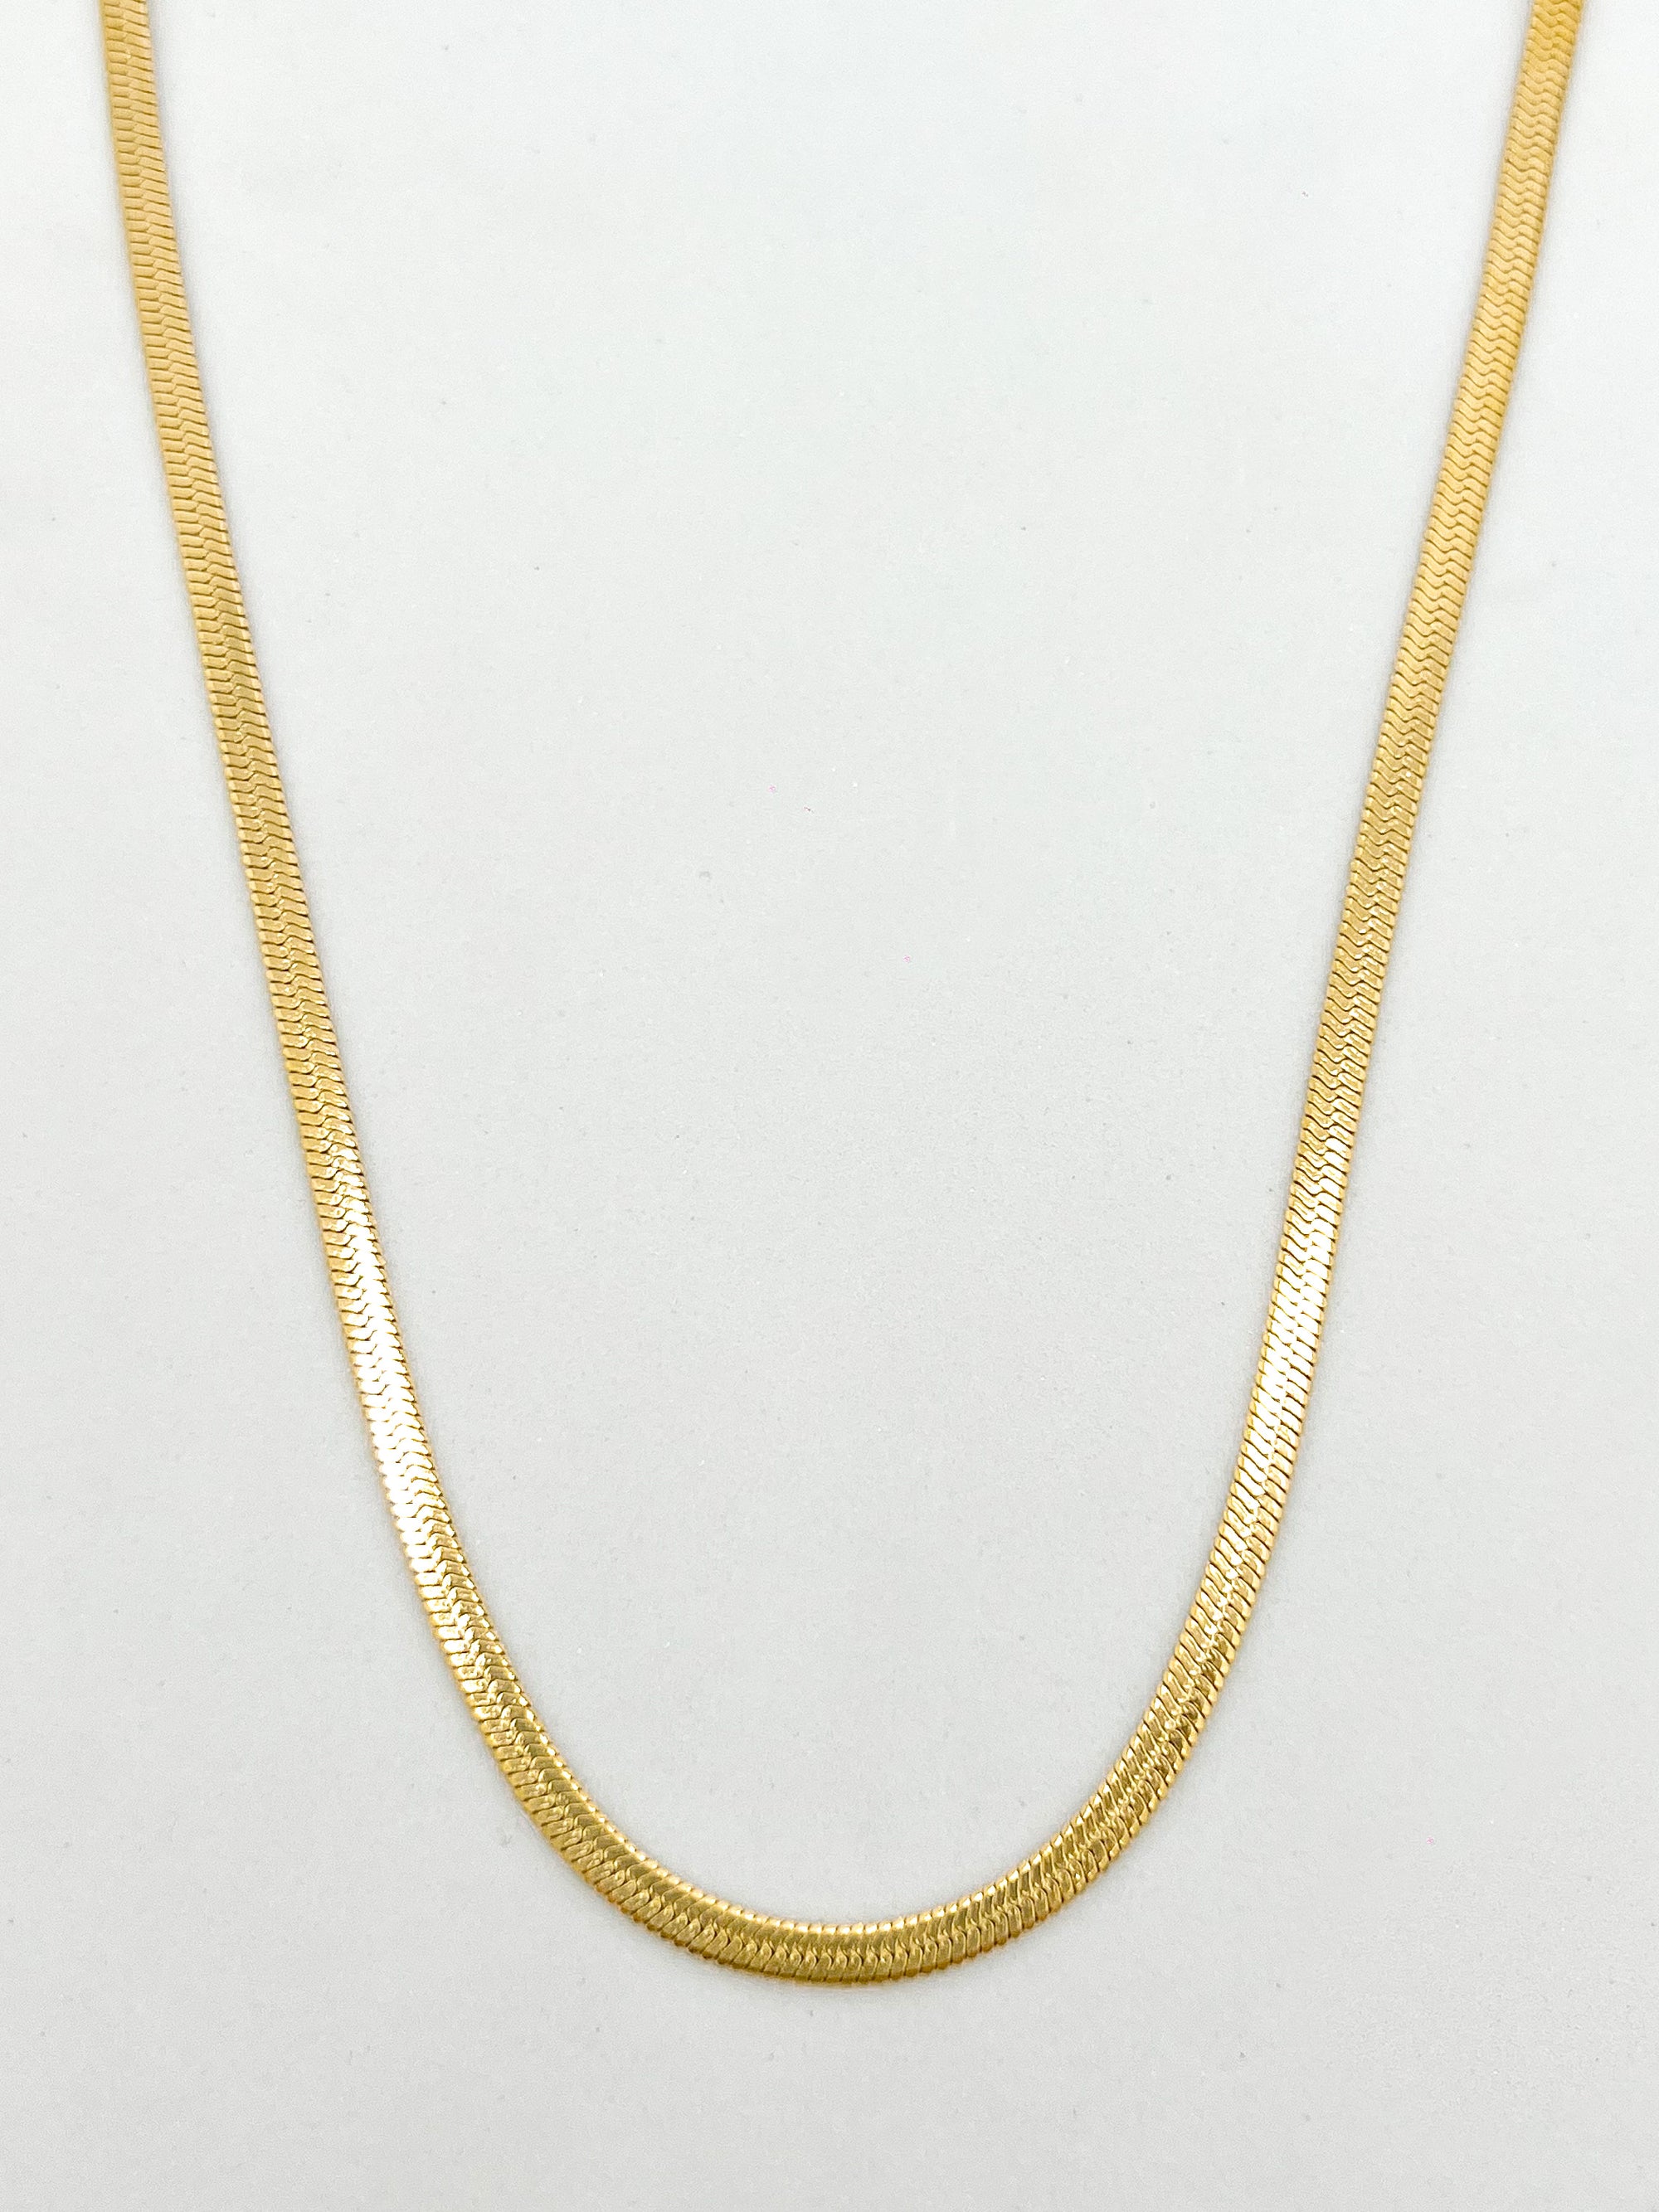 Slithering Elegance Chain - For the Girls Jewelry